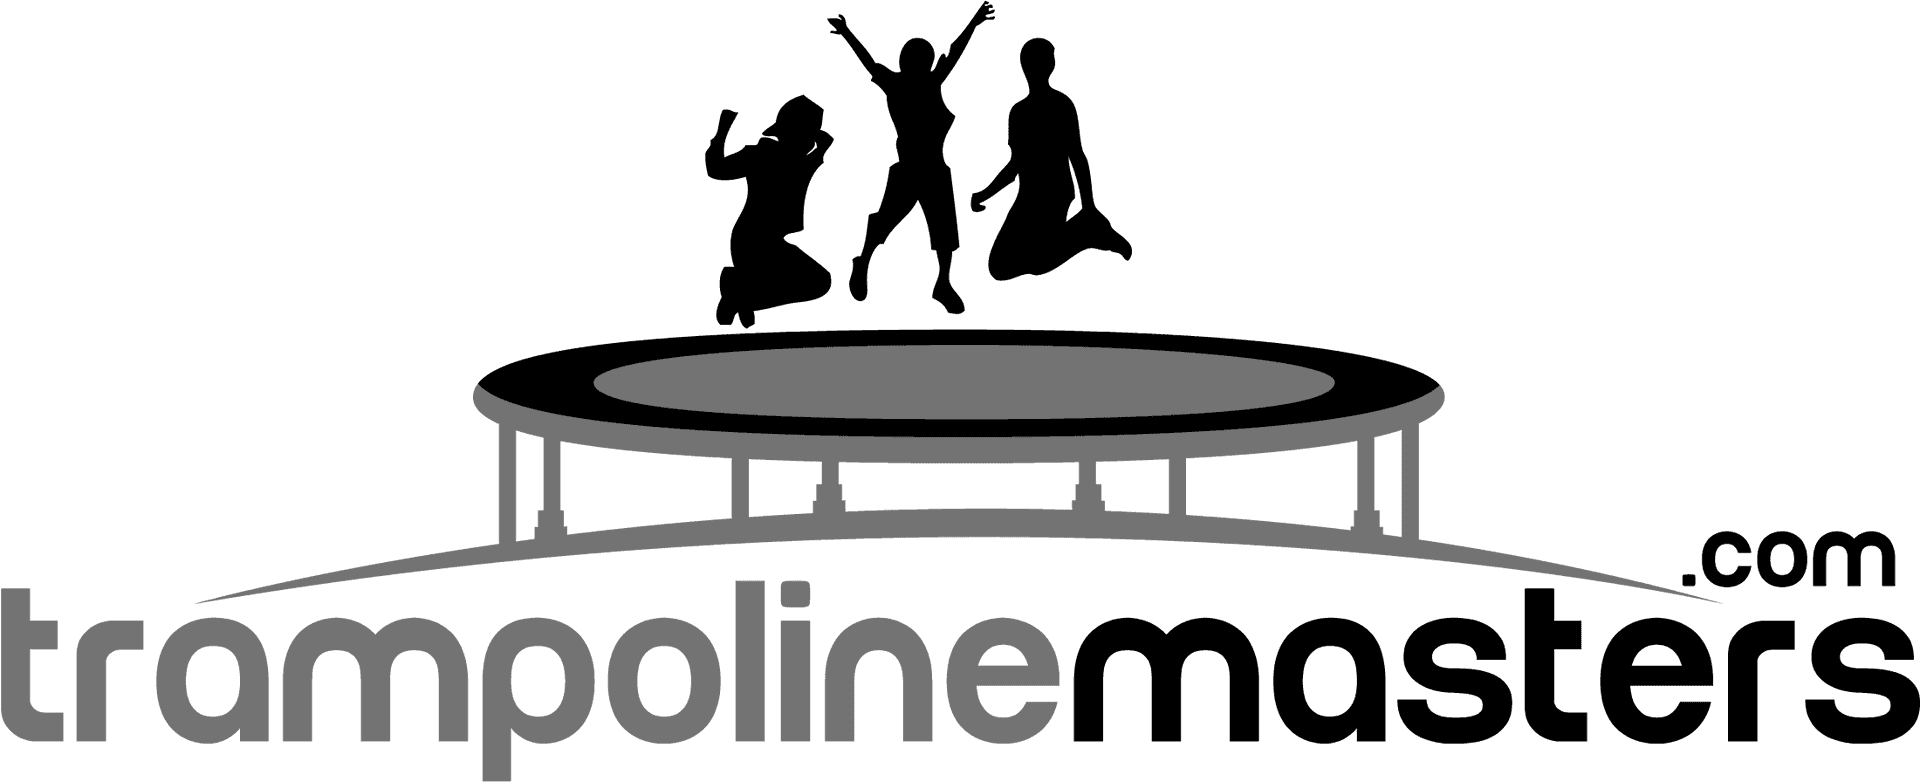 Trampoline Masters Logo Jumping Silhouettes PNG